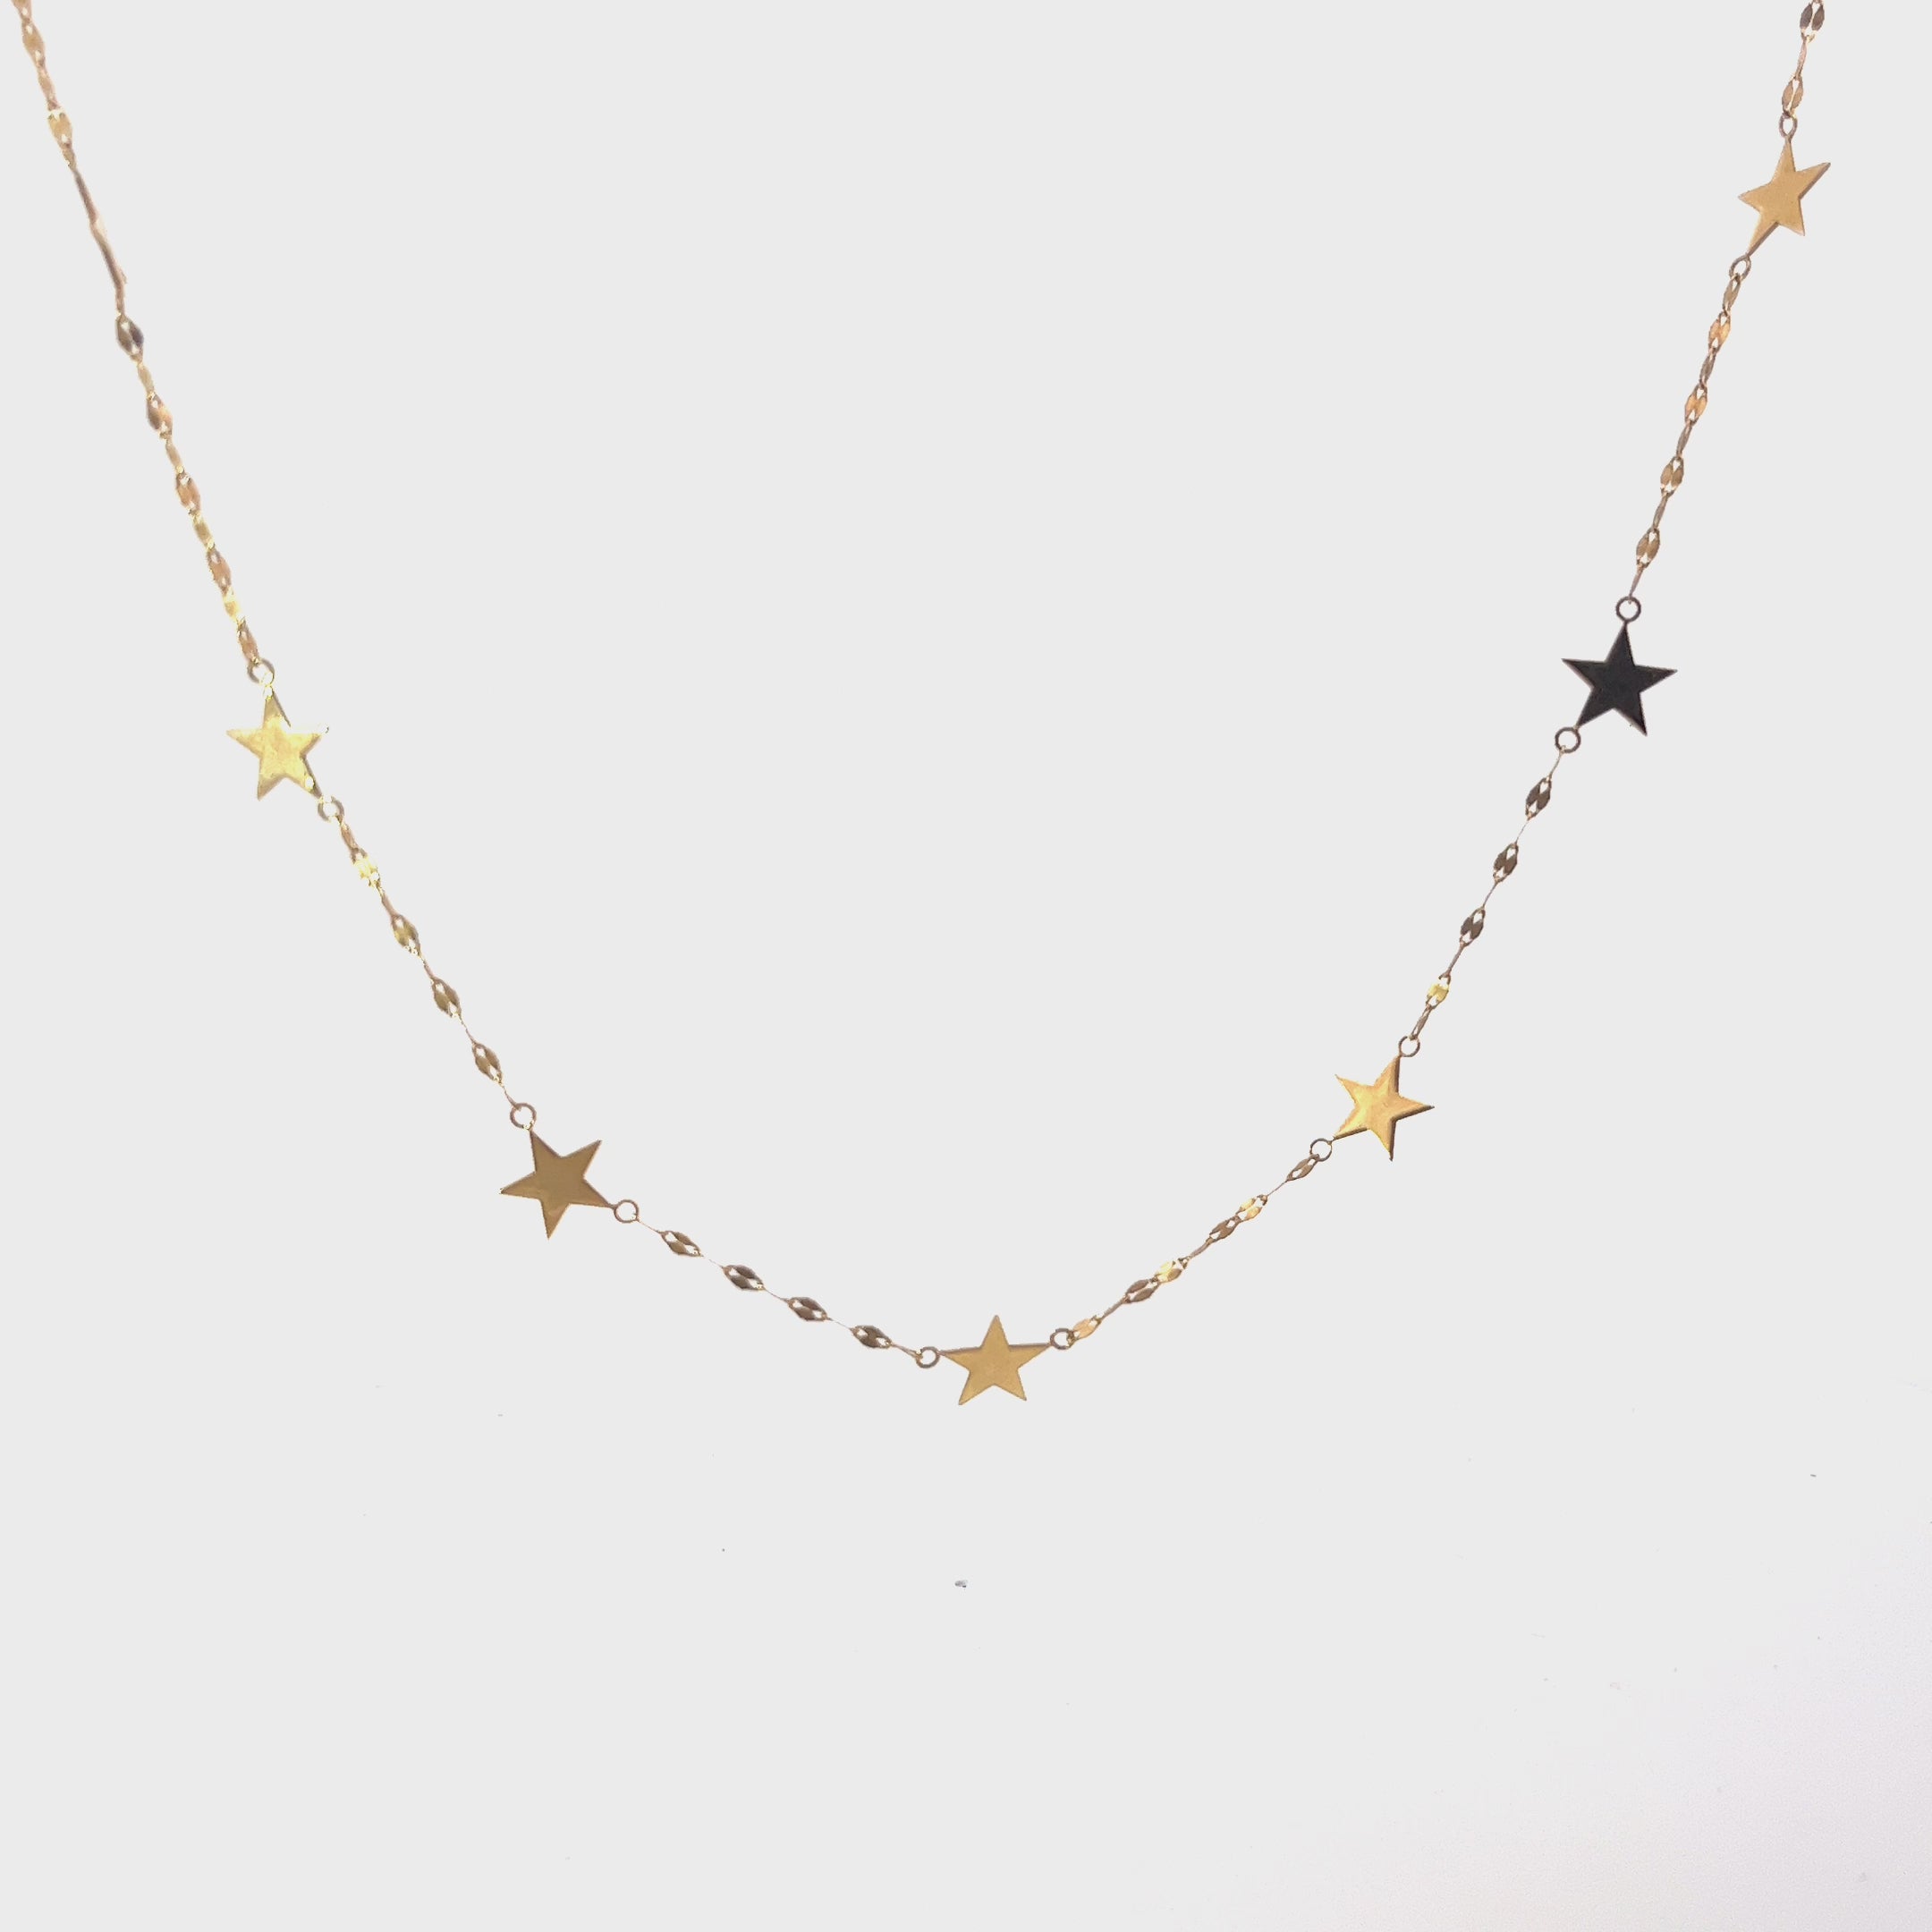 Ladies 14k yellow gold Dangle Star necklace.